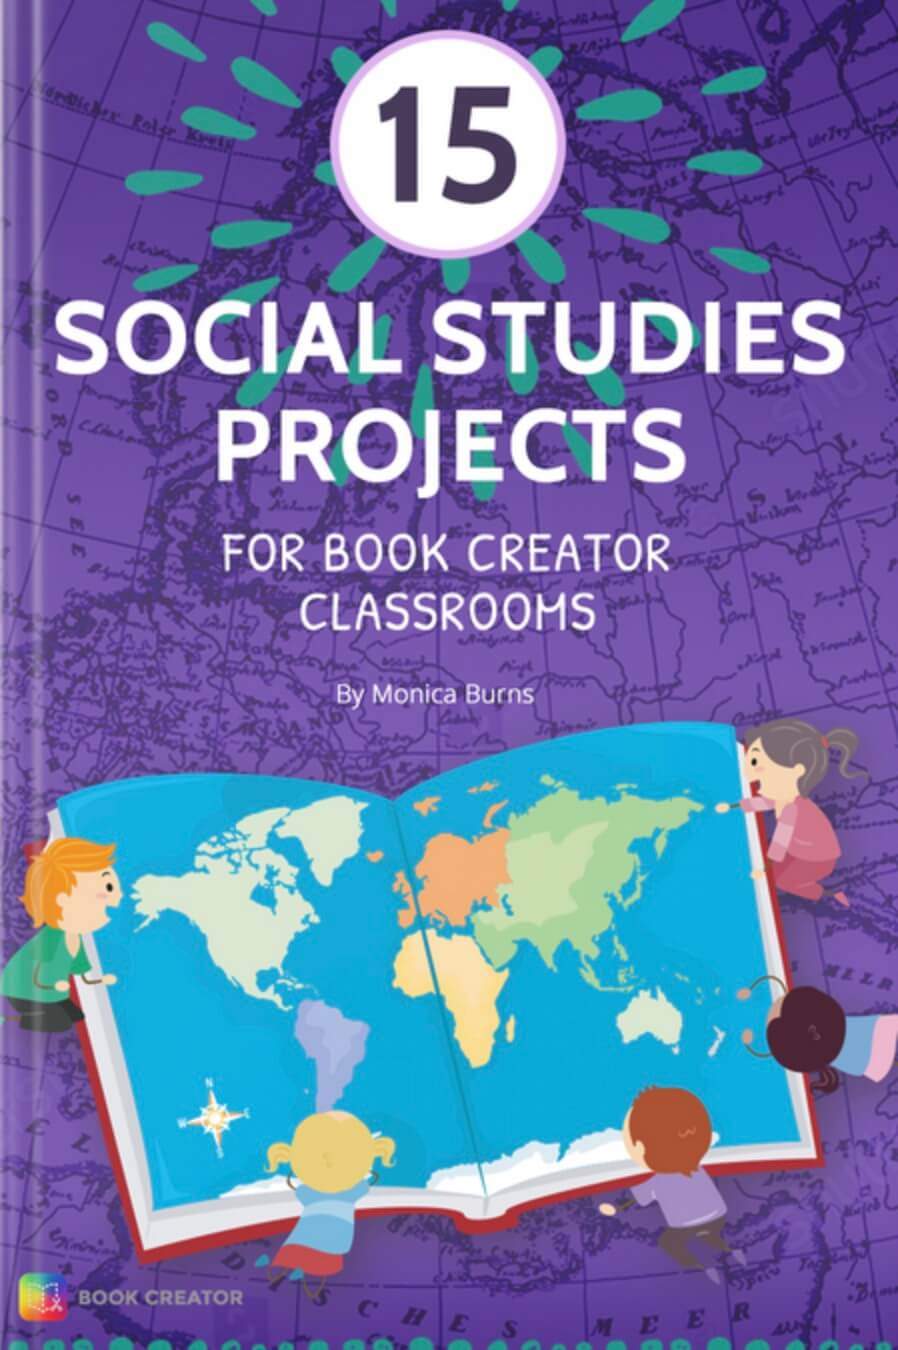 15 Social Studies Projects